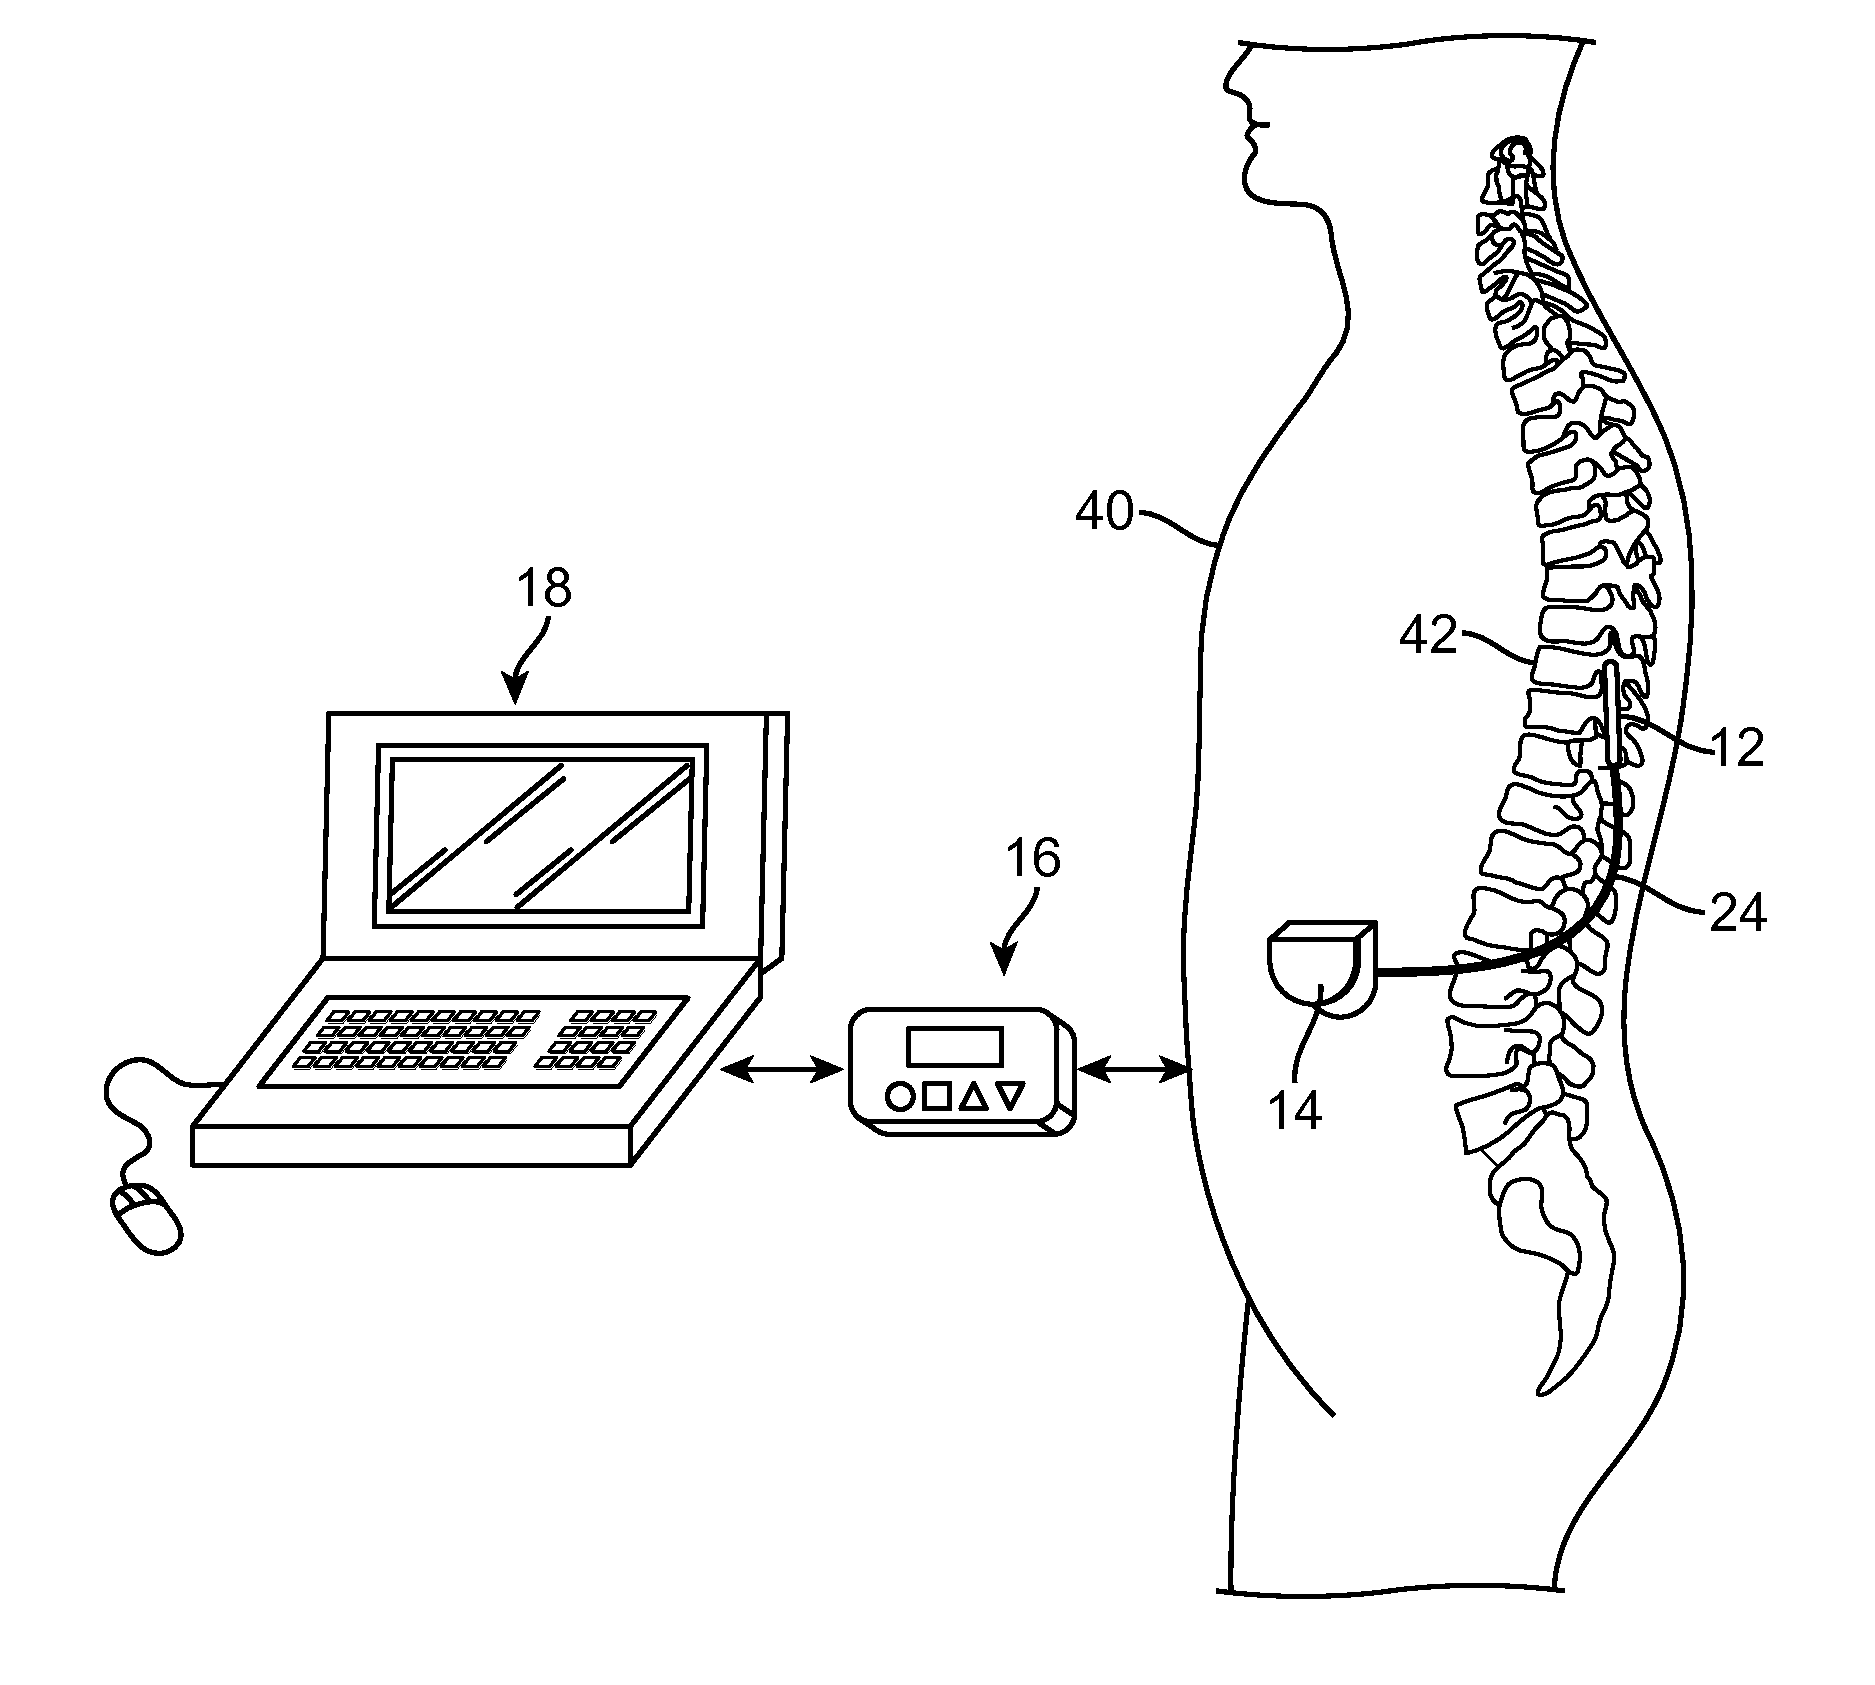 System and method for spinal cord stimulation to treat motor disorders